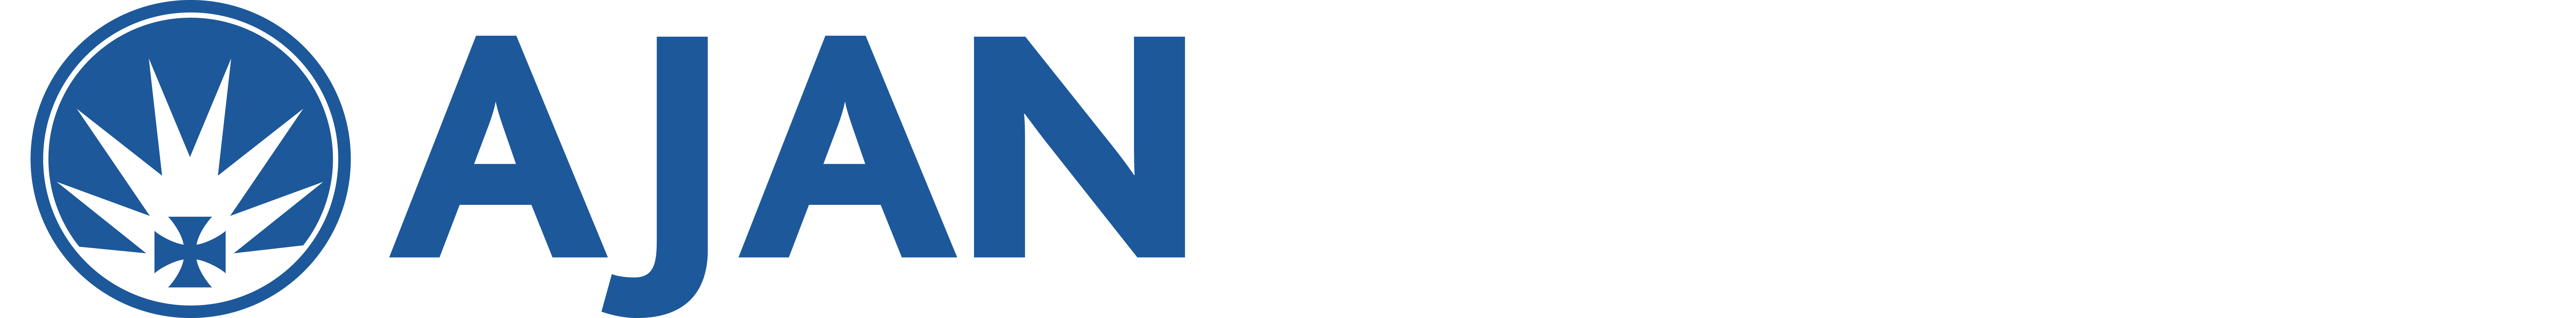 Barriers and facilitators to the professional integration of internationally qualified nurses in Australia: a mixed methods systematic review